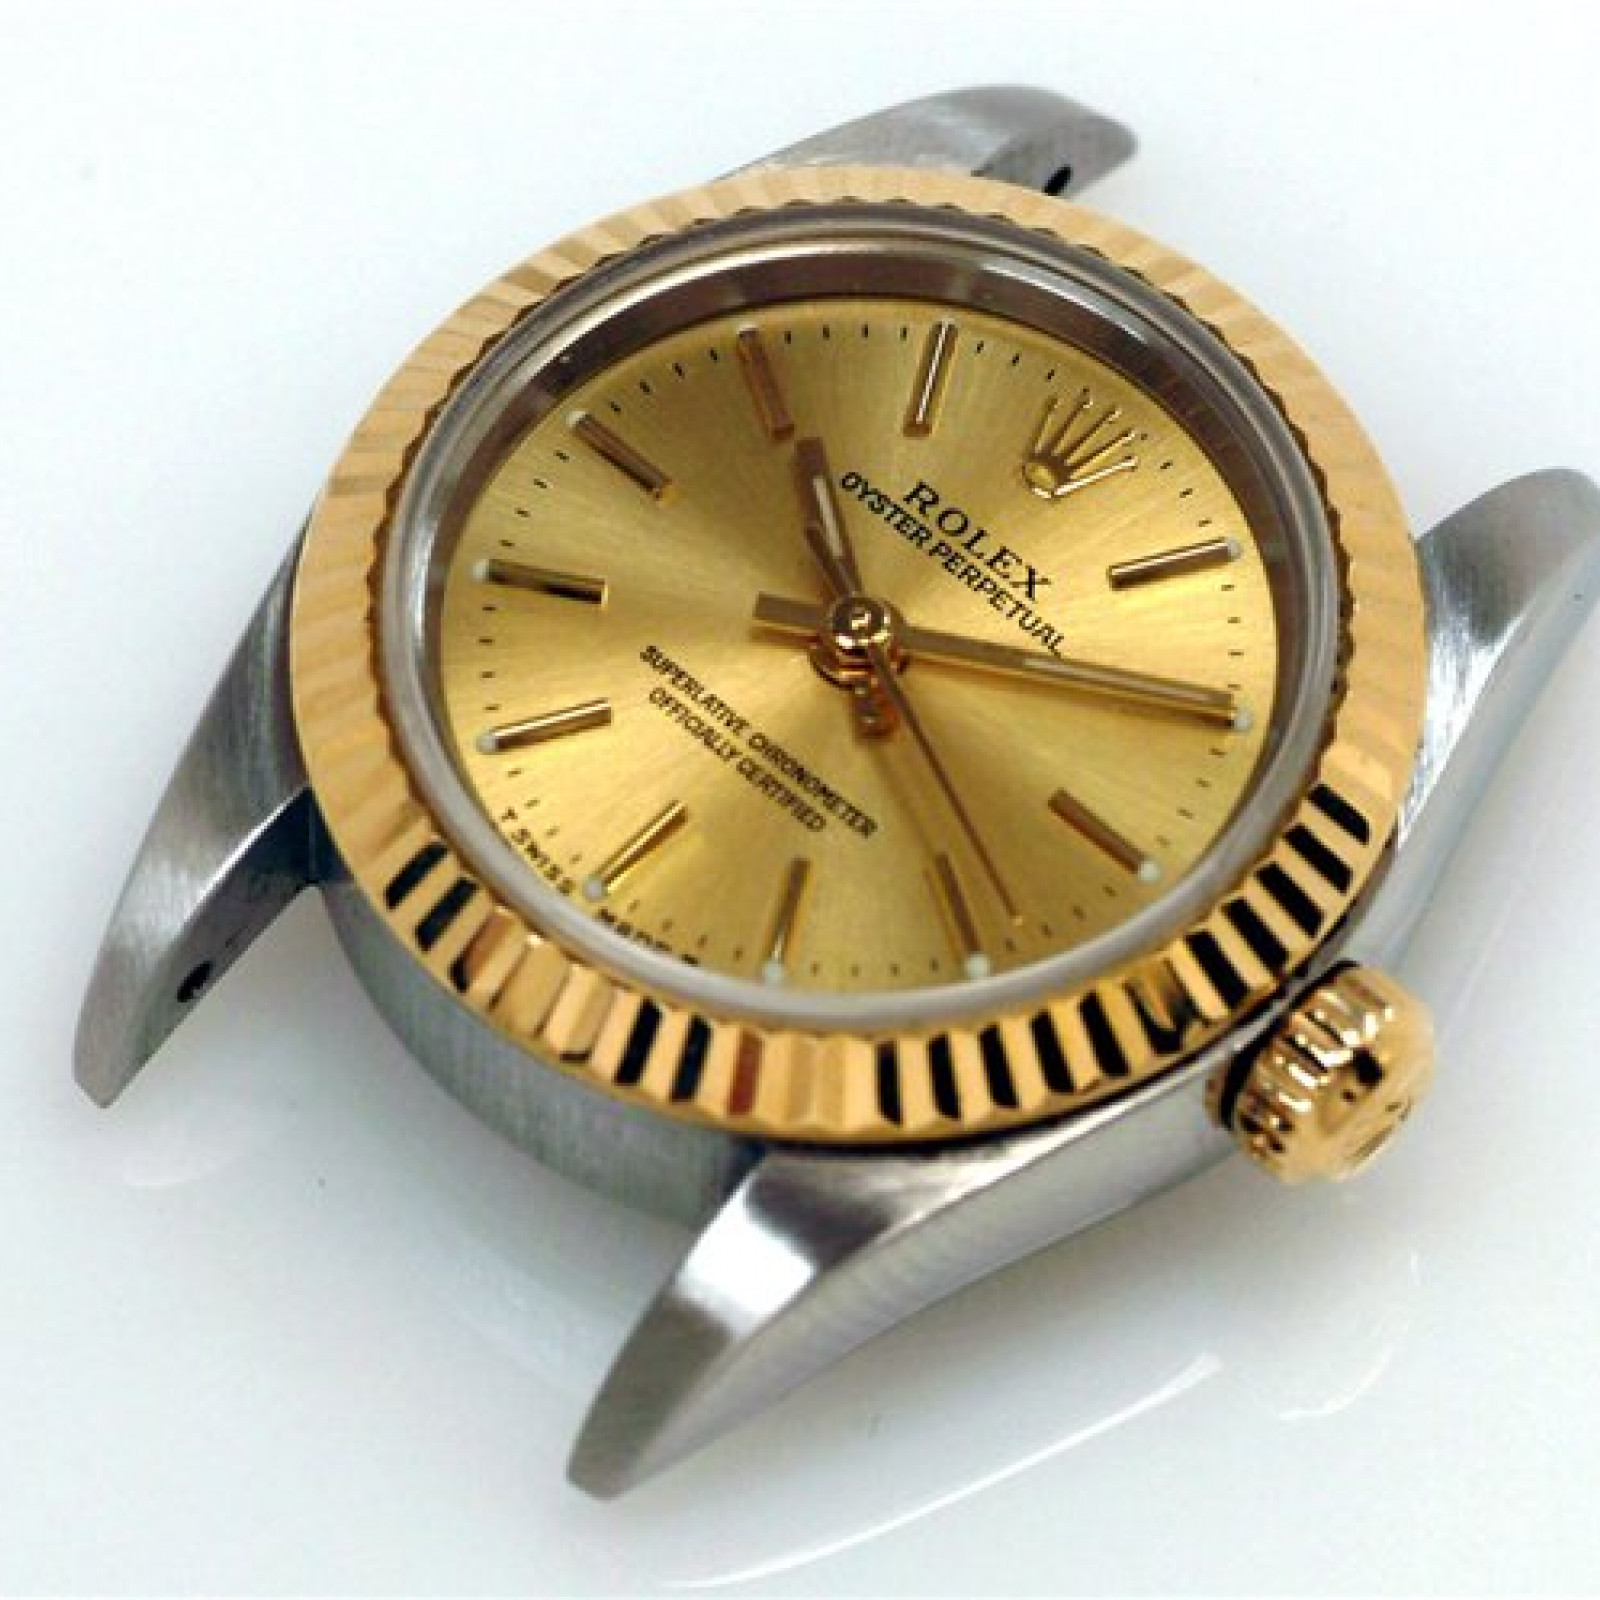 Rolex Oyster Perpetual 76193 Gold & Steel